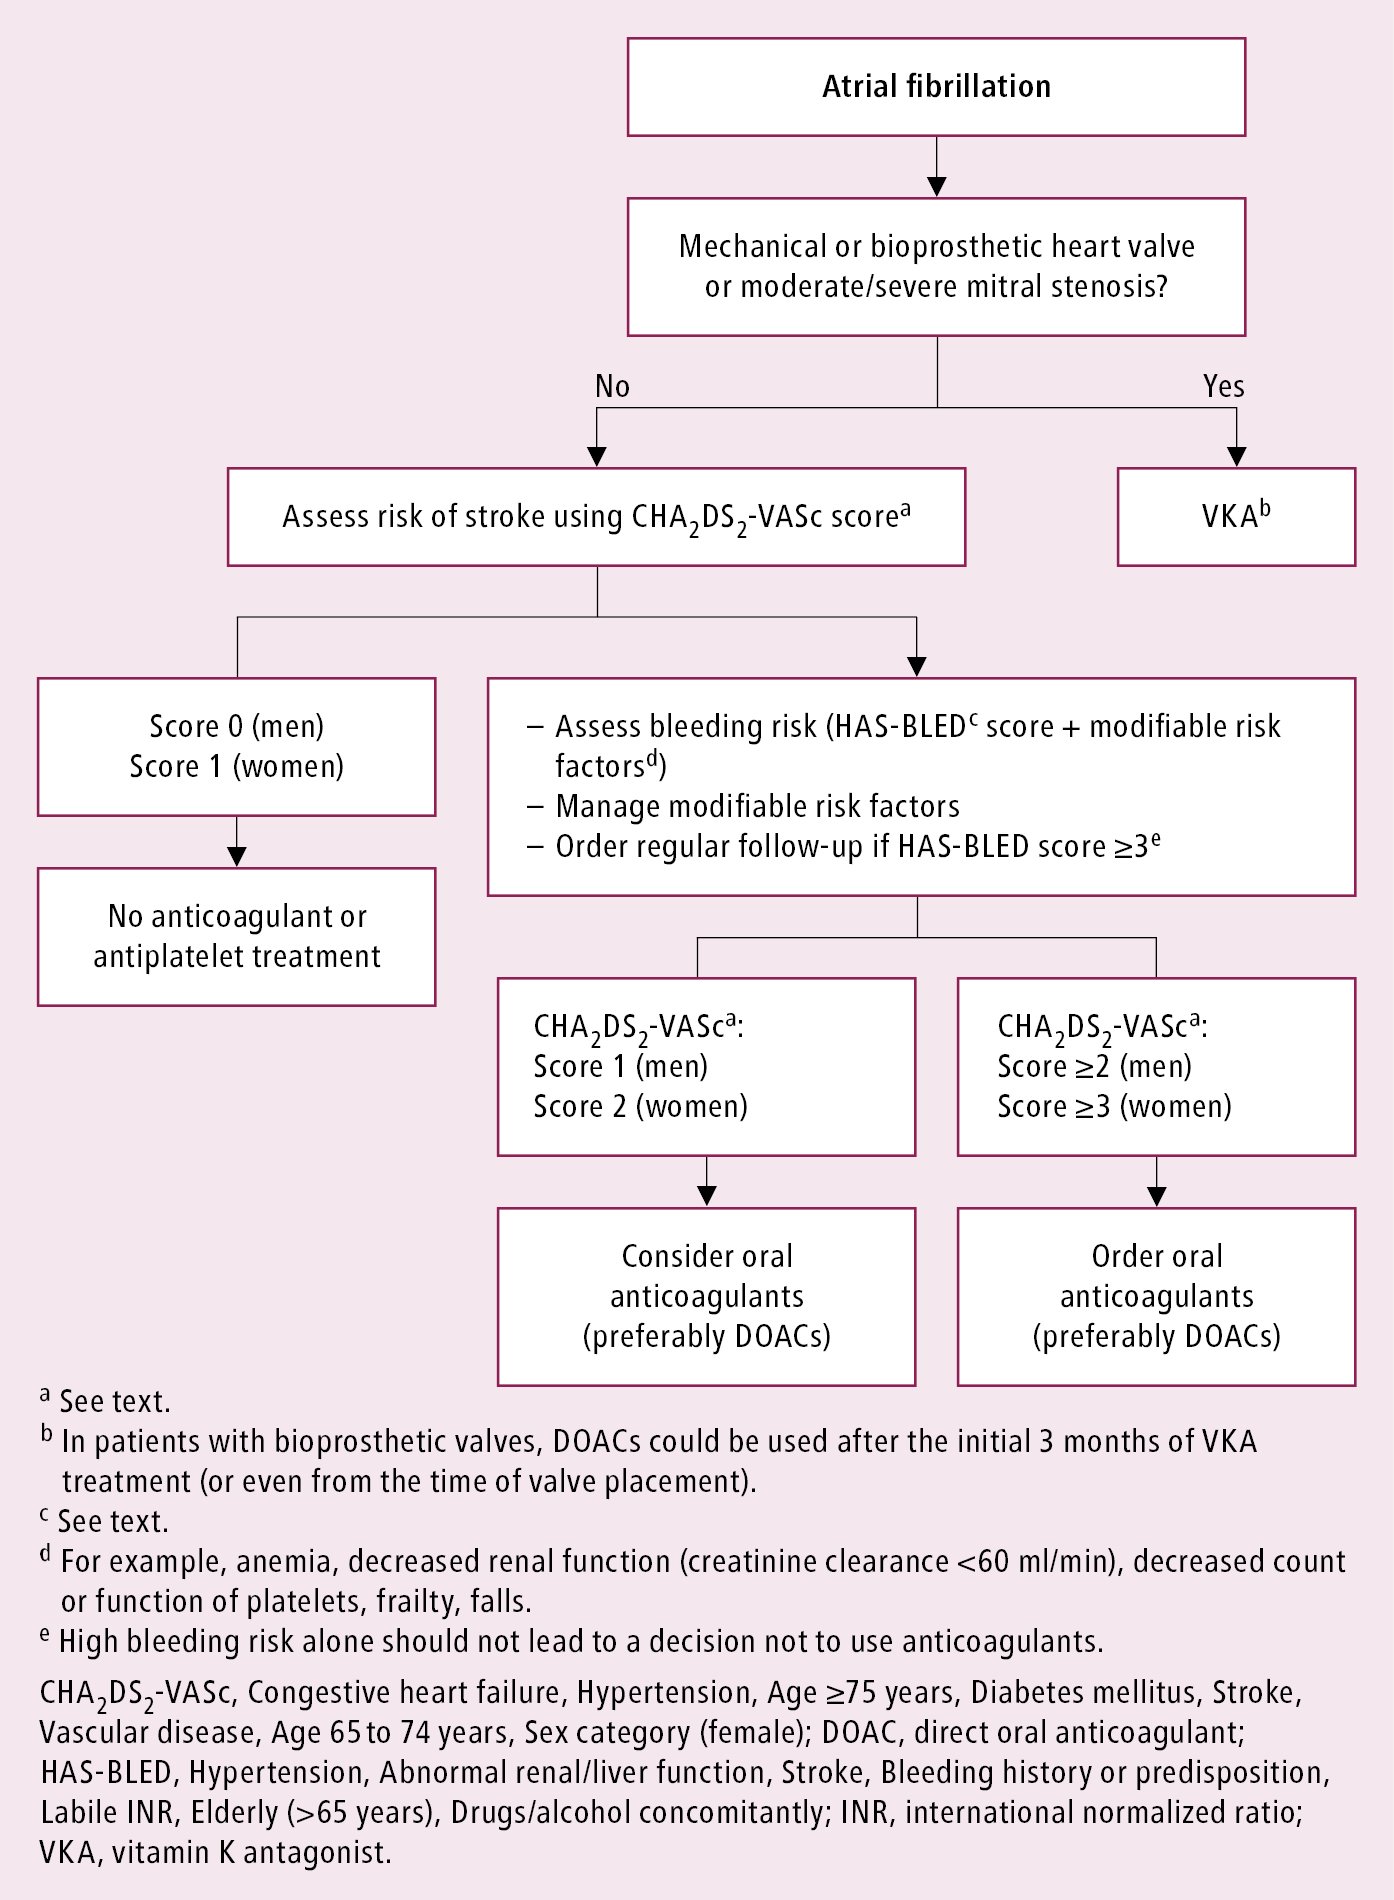 Figure 031_1195.  Algorithm for prevention of thromboembolism in patients with atrial fibrillation.  Adapted from the 2012 European Society of Cardiology guidelines.  